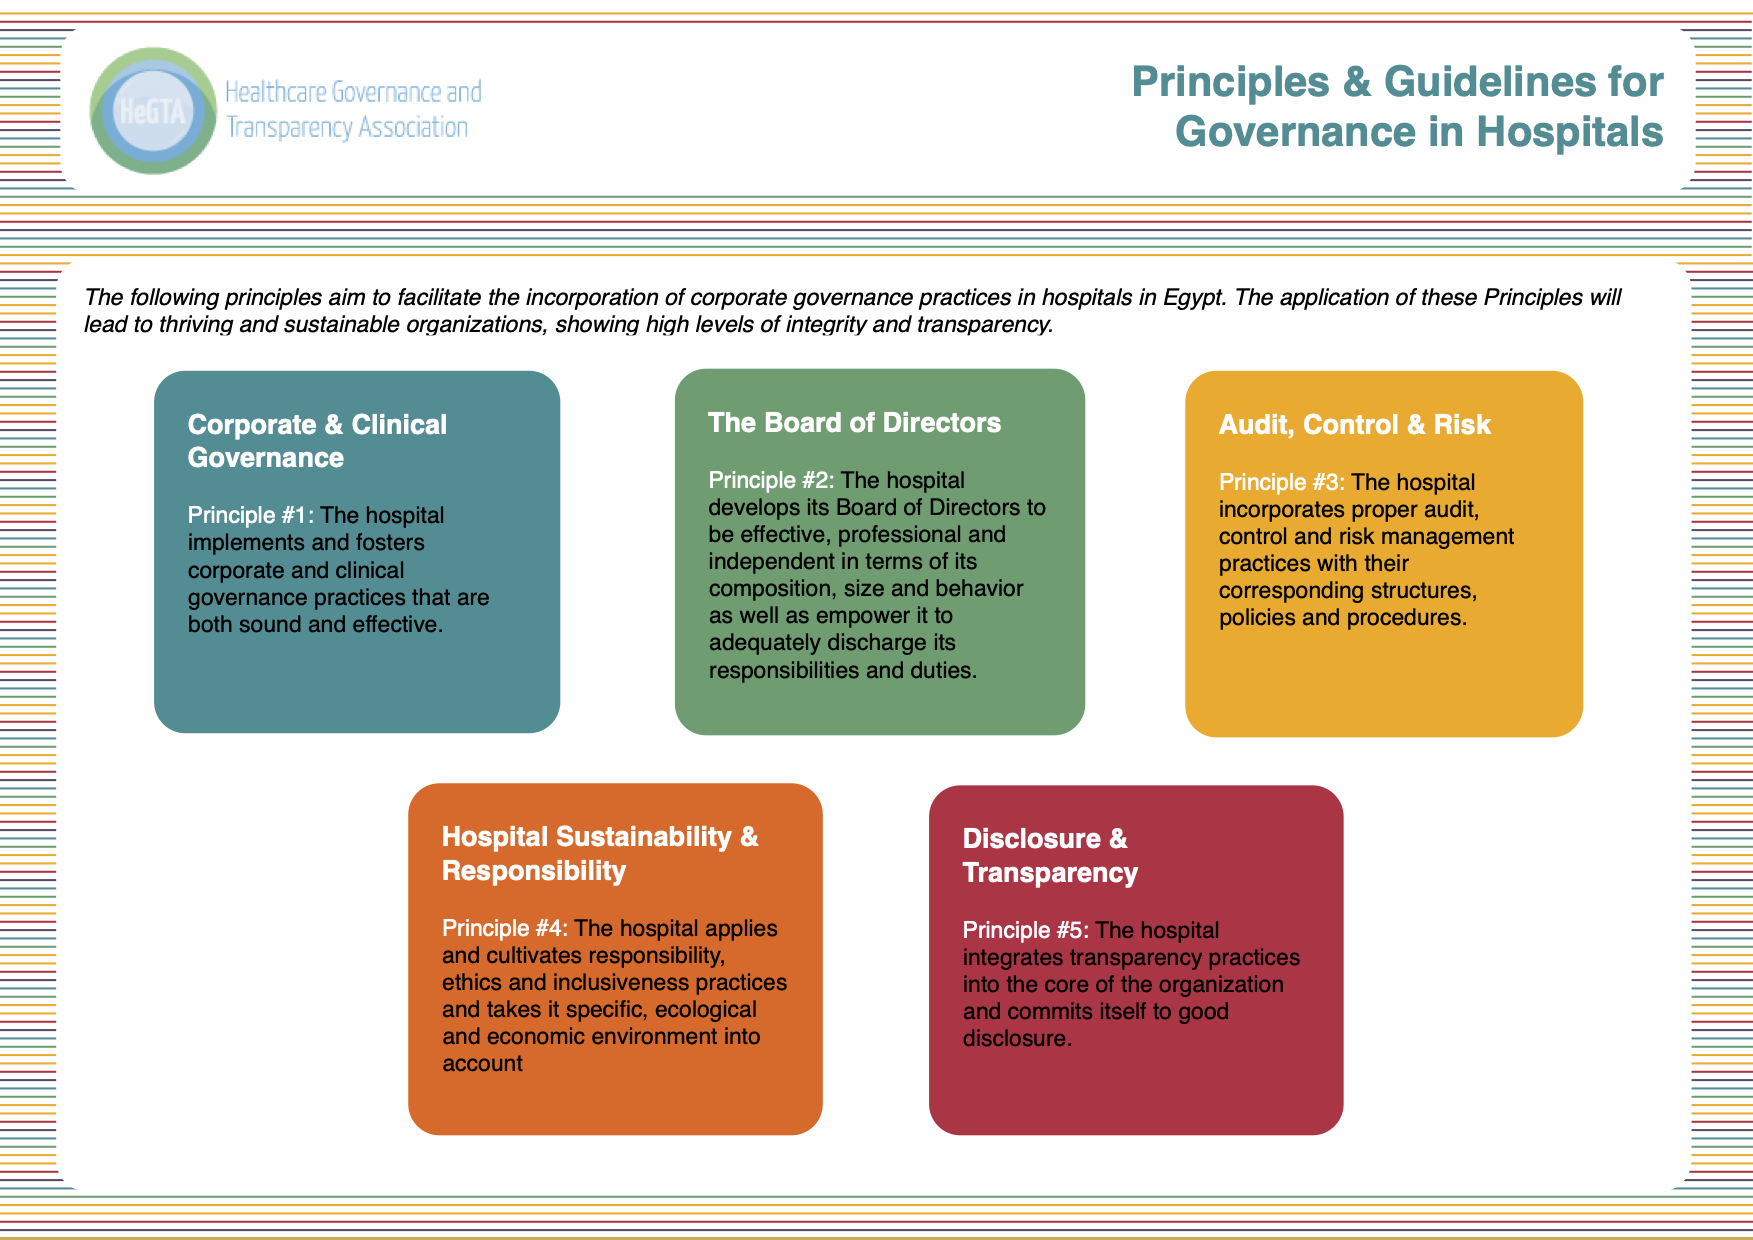 Principles and Guidelines for Governance in Hospitals